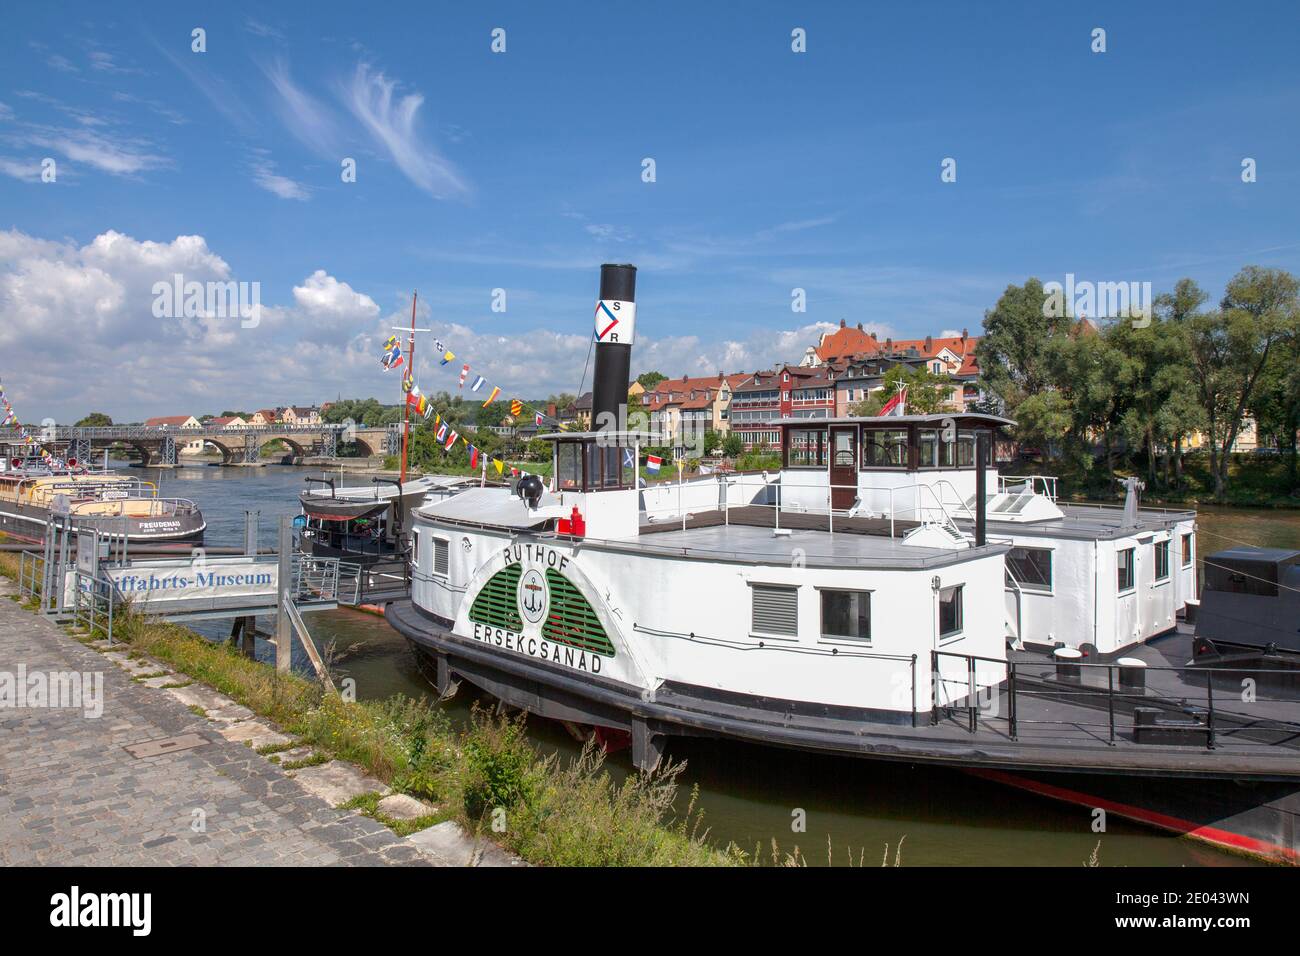 The 'Rutof/Ersekcsanad' at  the Danube Navigation Museum, Regensburg, Germany, is the last Bavarian steam paddle tug to ply the Danube River. Built 19 Stock Photo